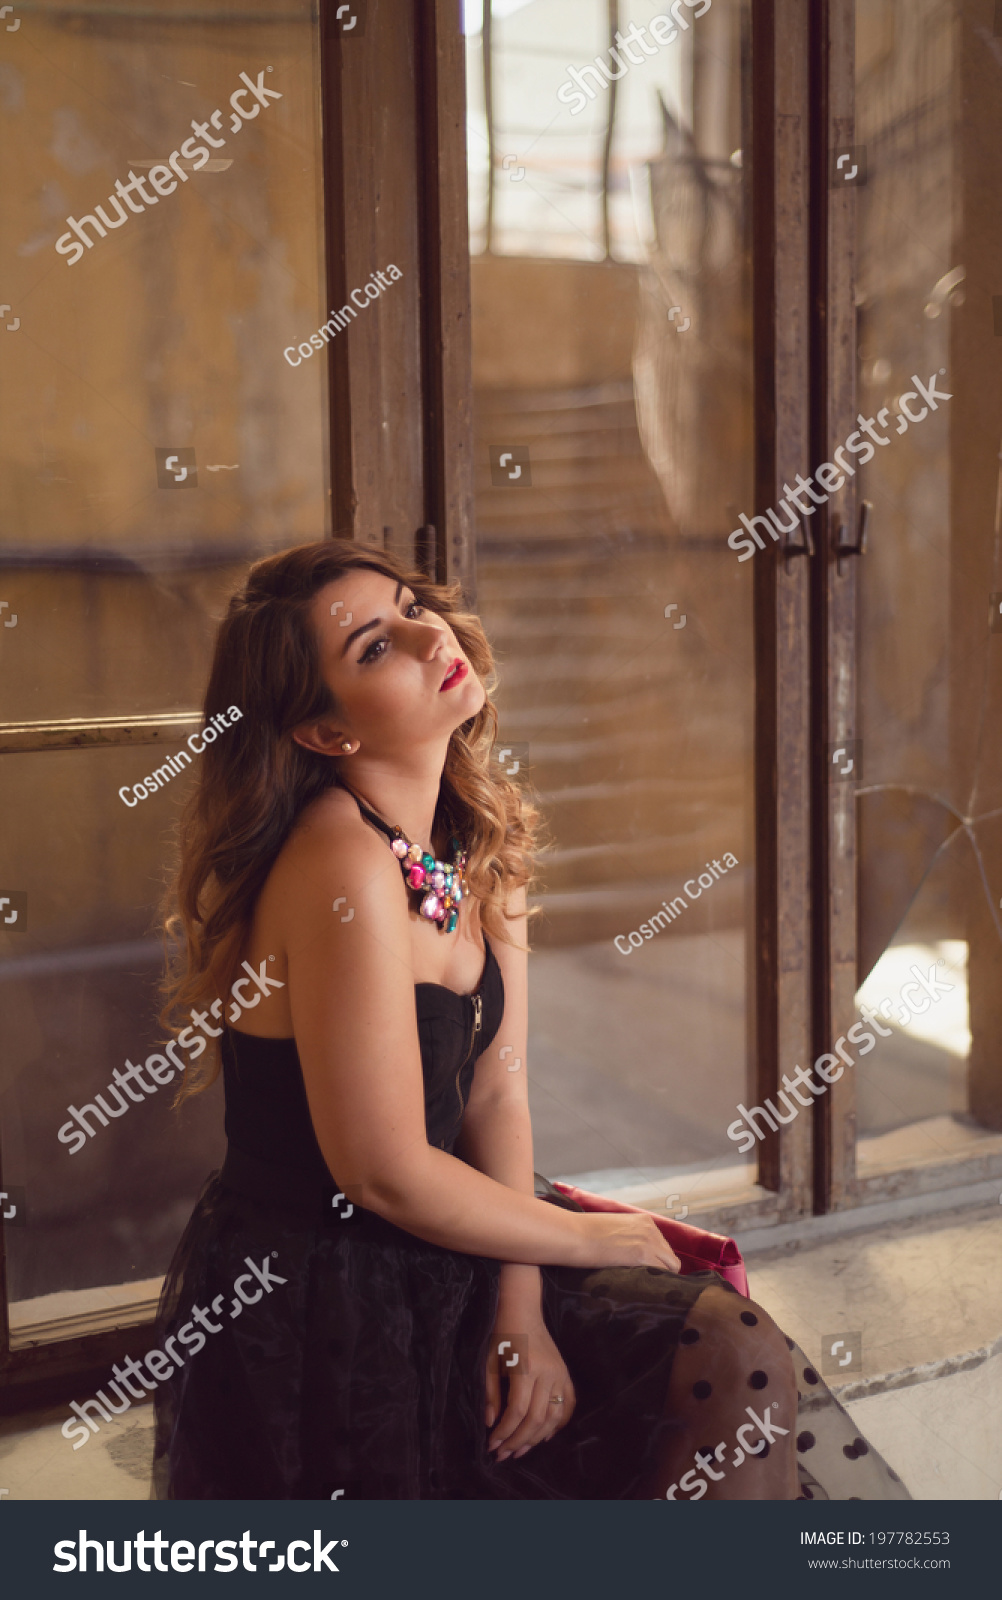 An alluring woman getting dressed in front of a window